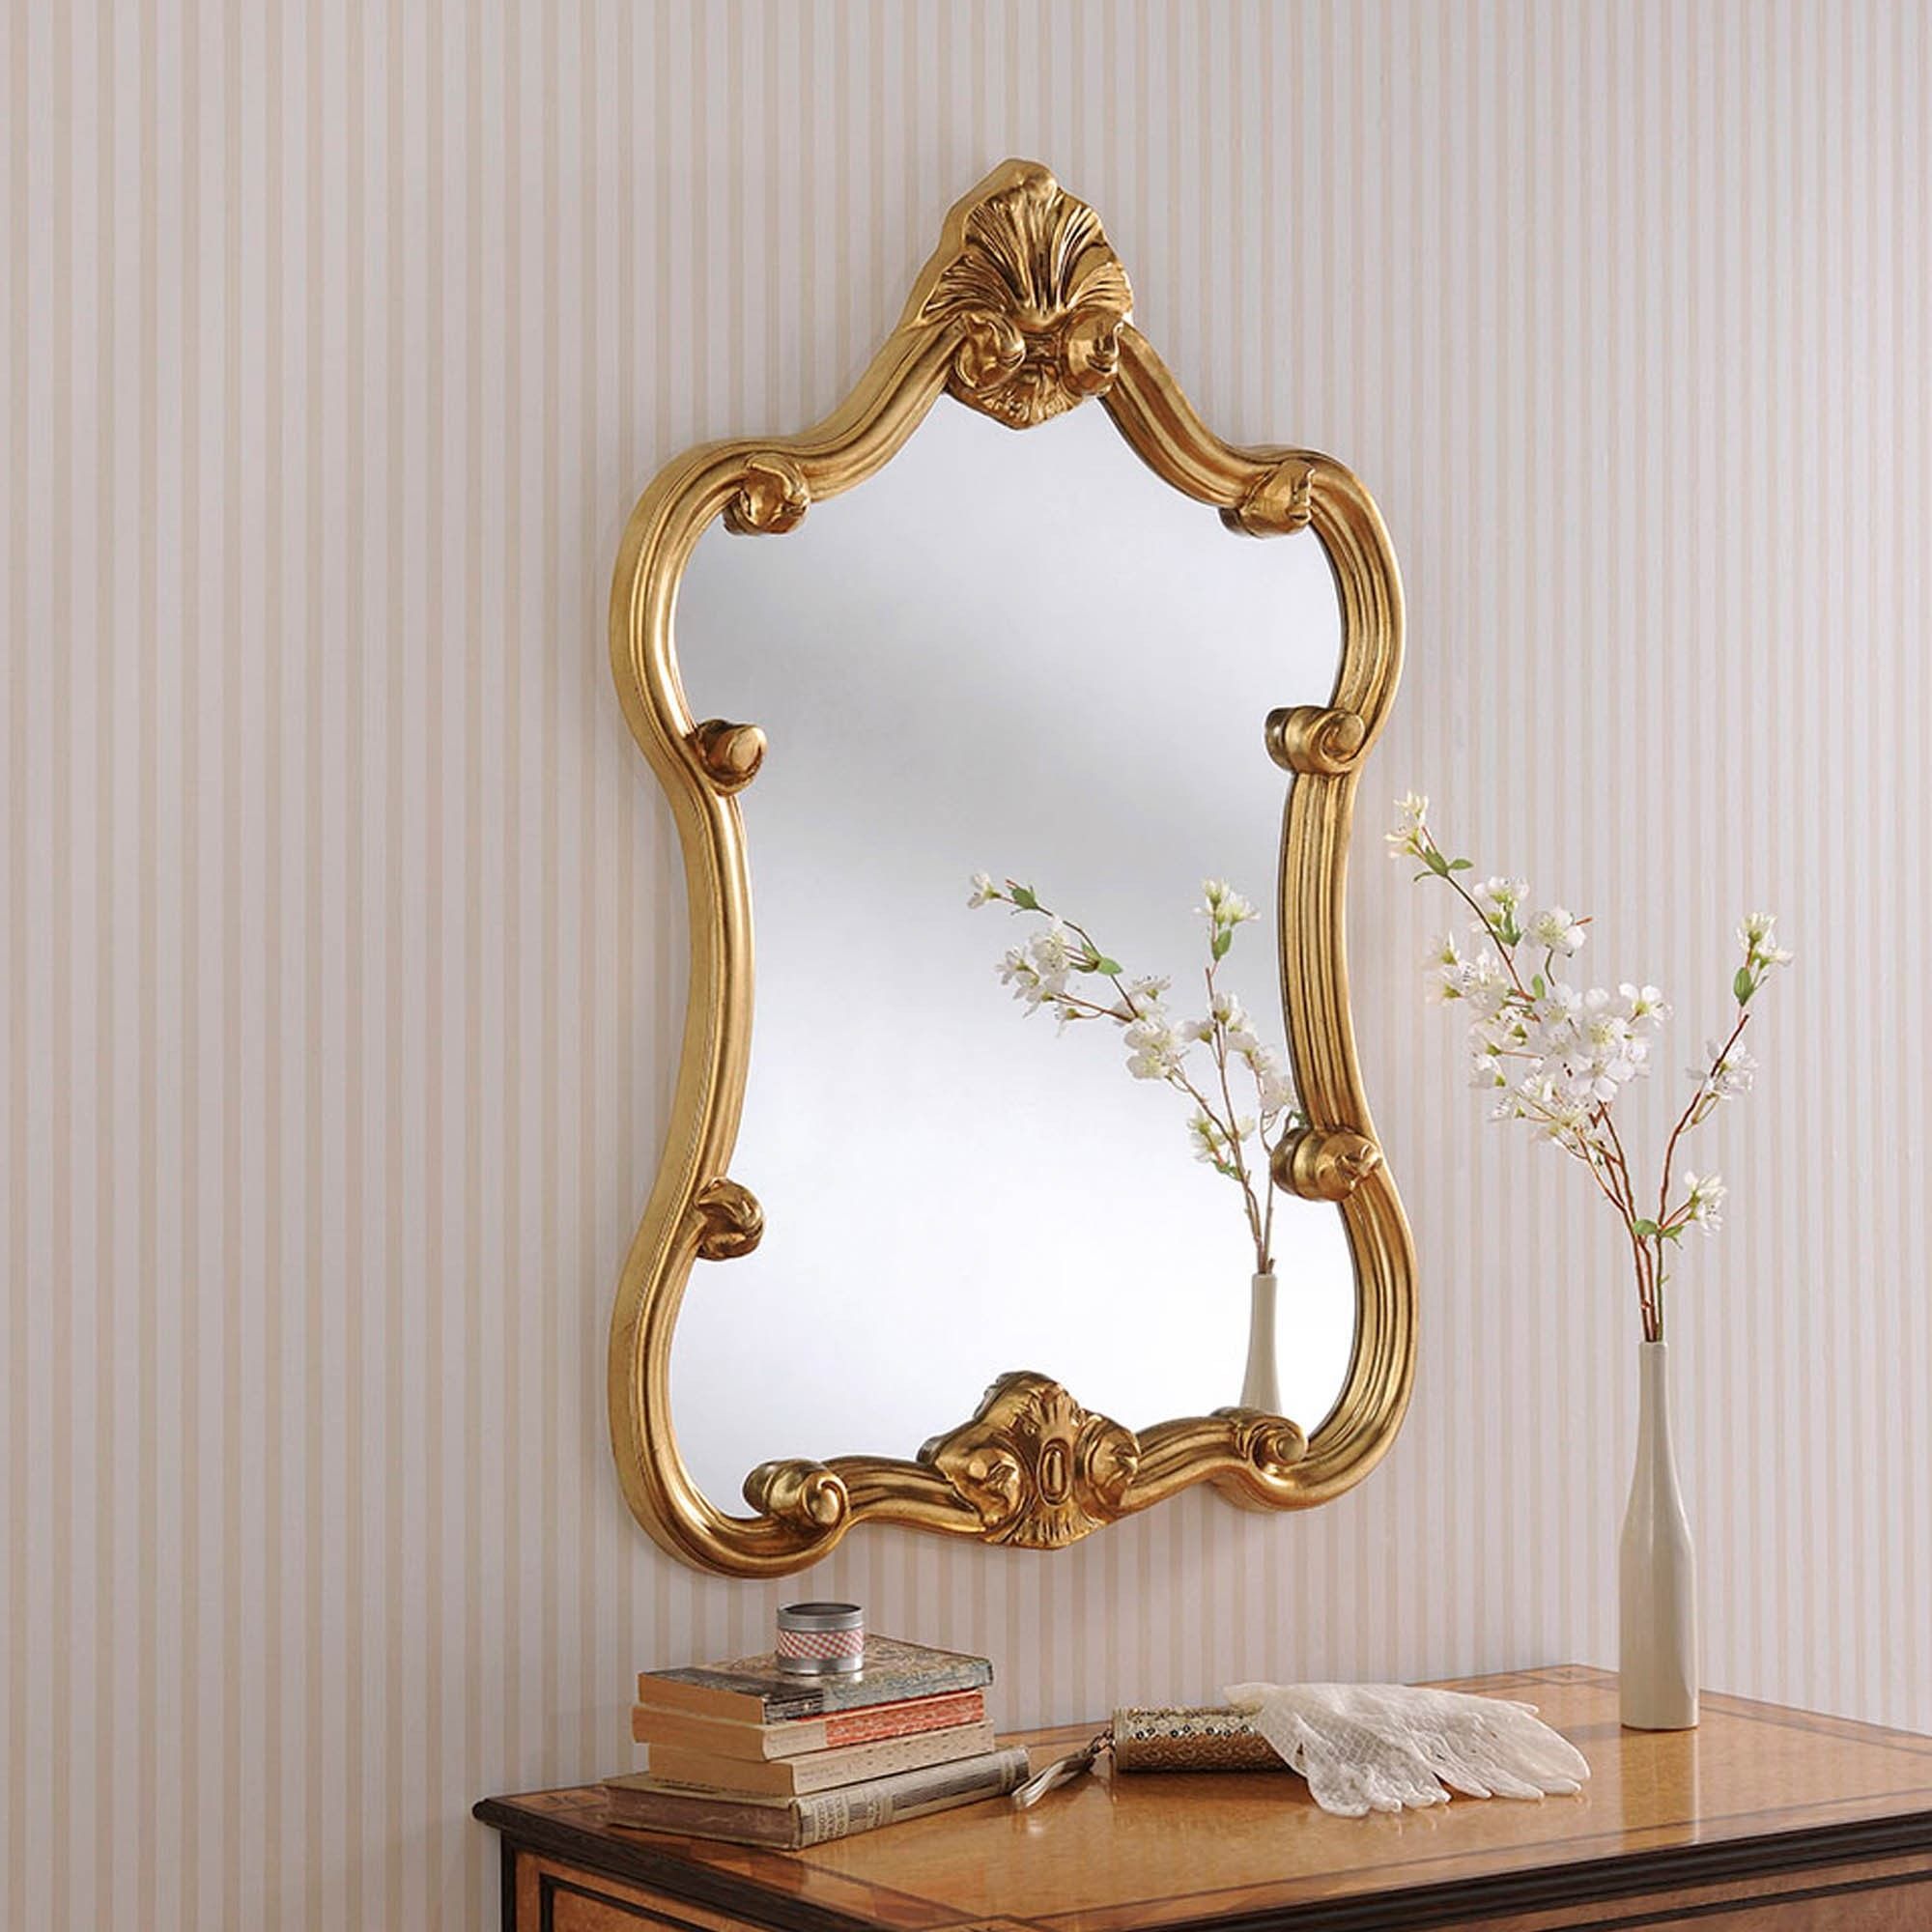 Decorative Gold Ornate Wall Mirror | Wall Mirrors Inside Wall Mirrors (Photo 15 of 15)